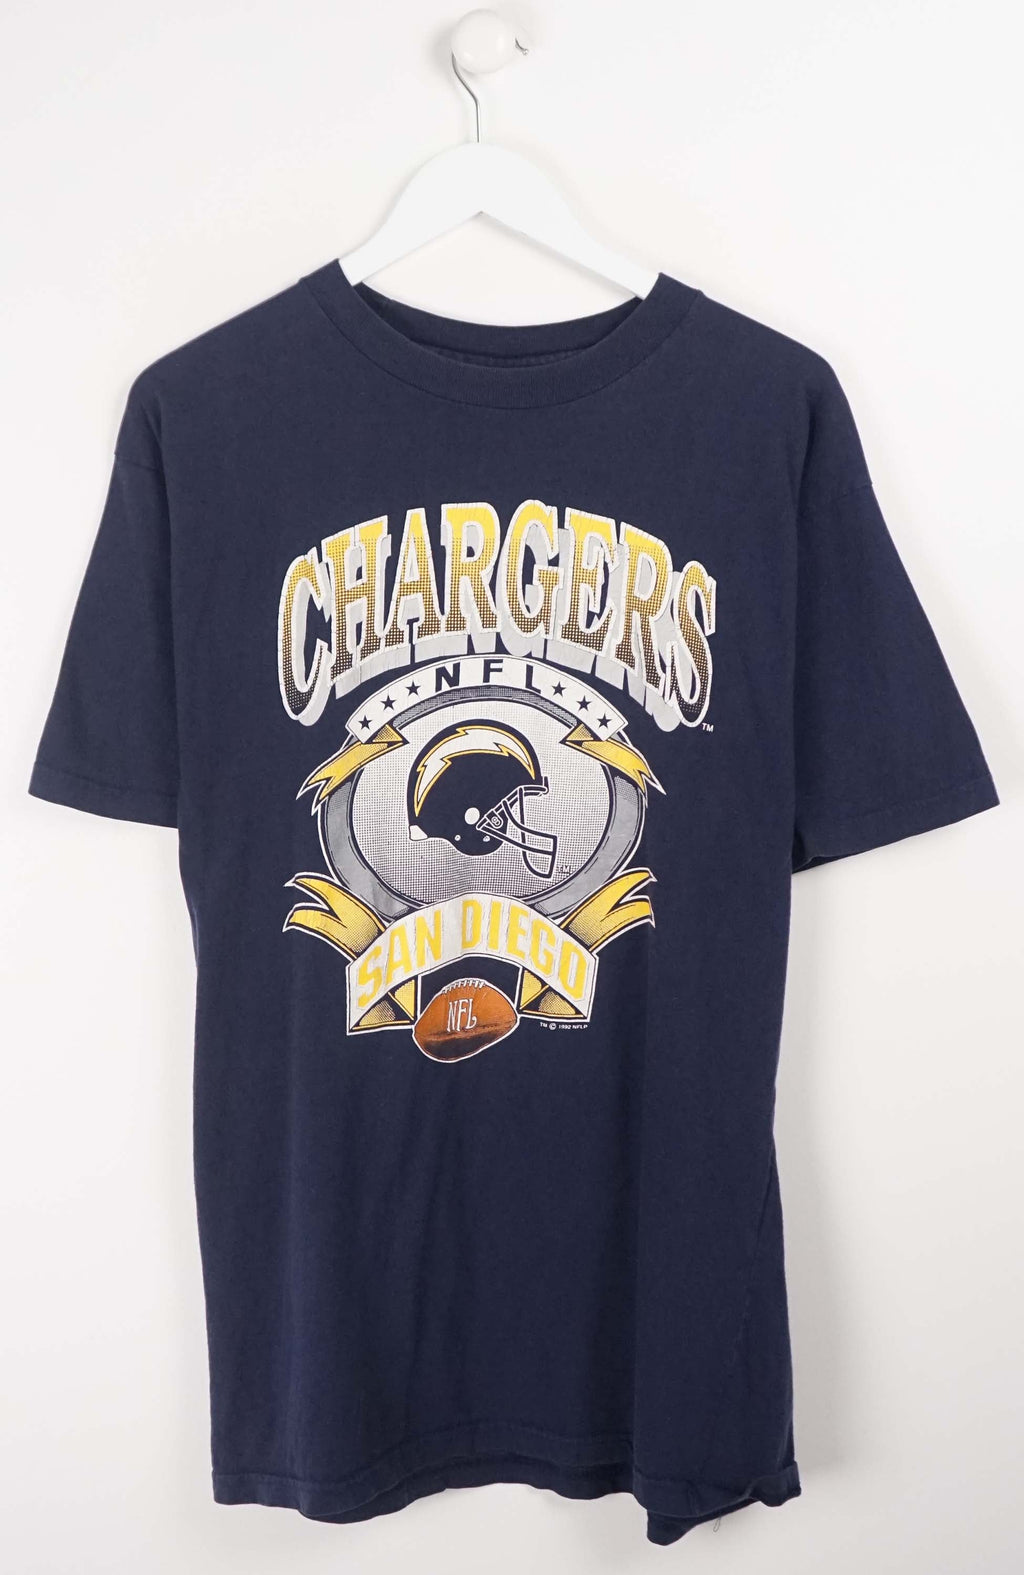 VINTAGE SAN DIEGO CHARGERS T-SHIRT (L)